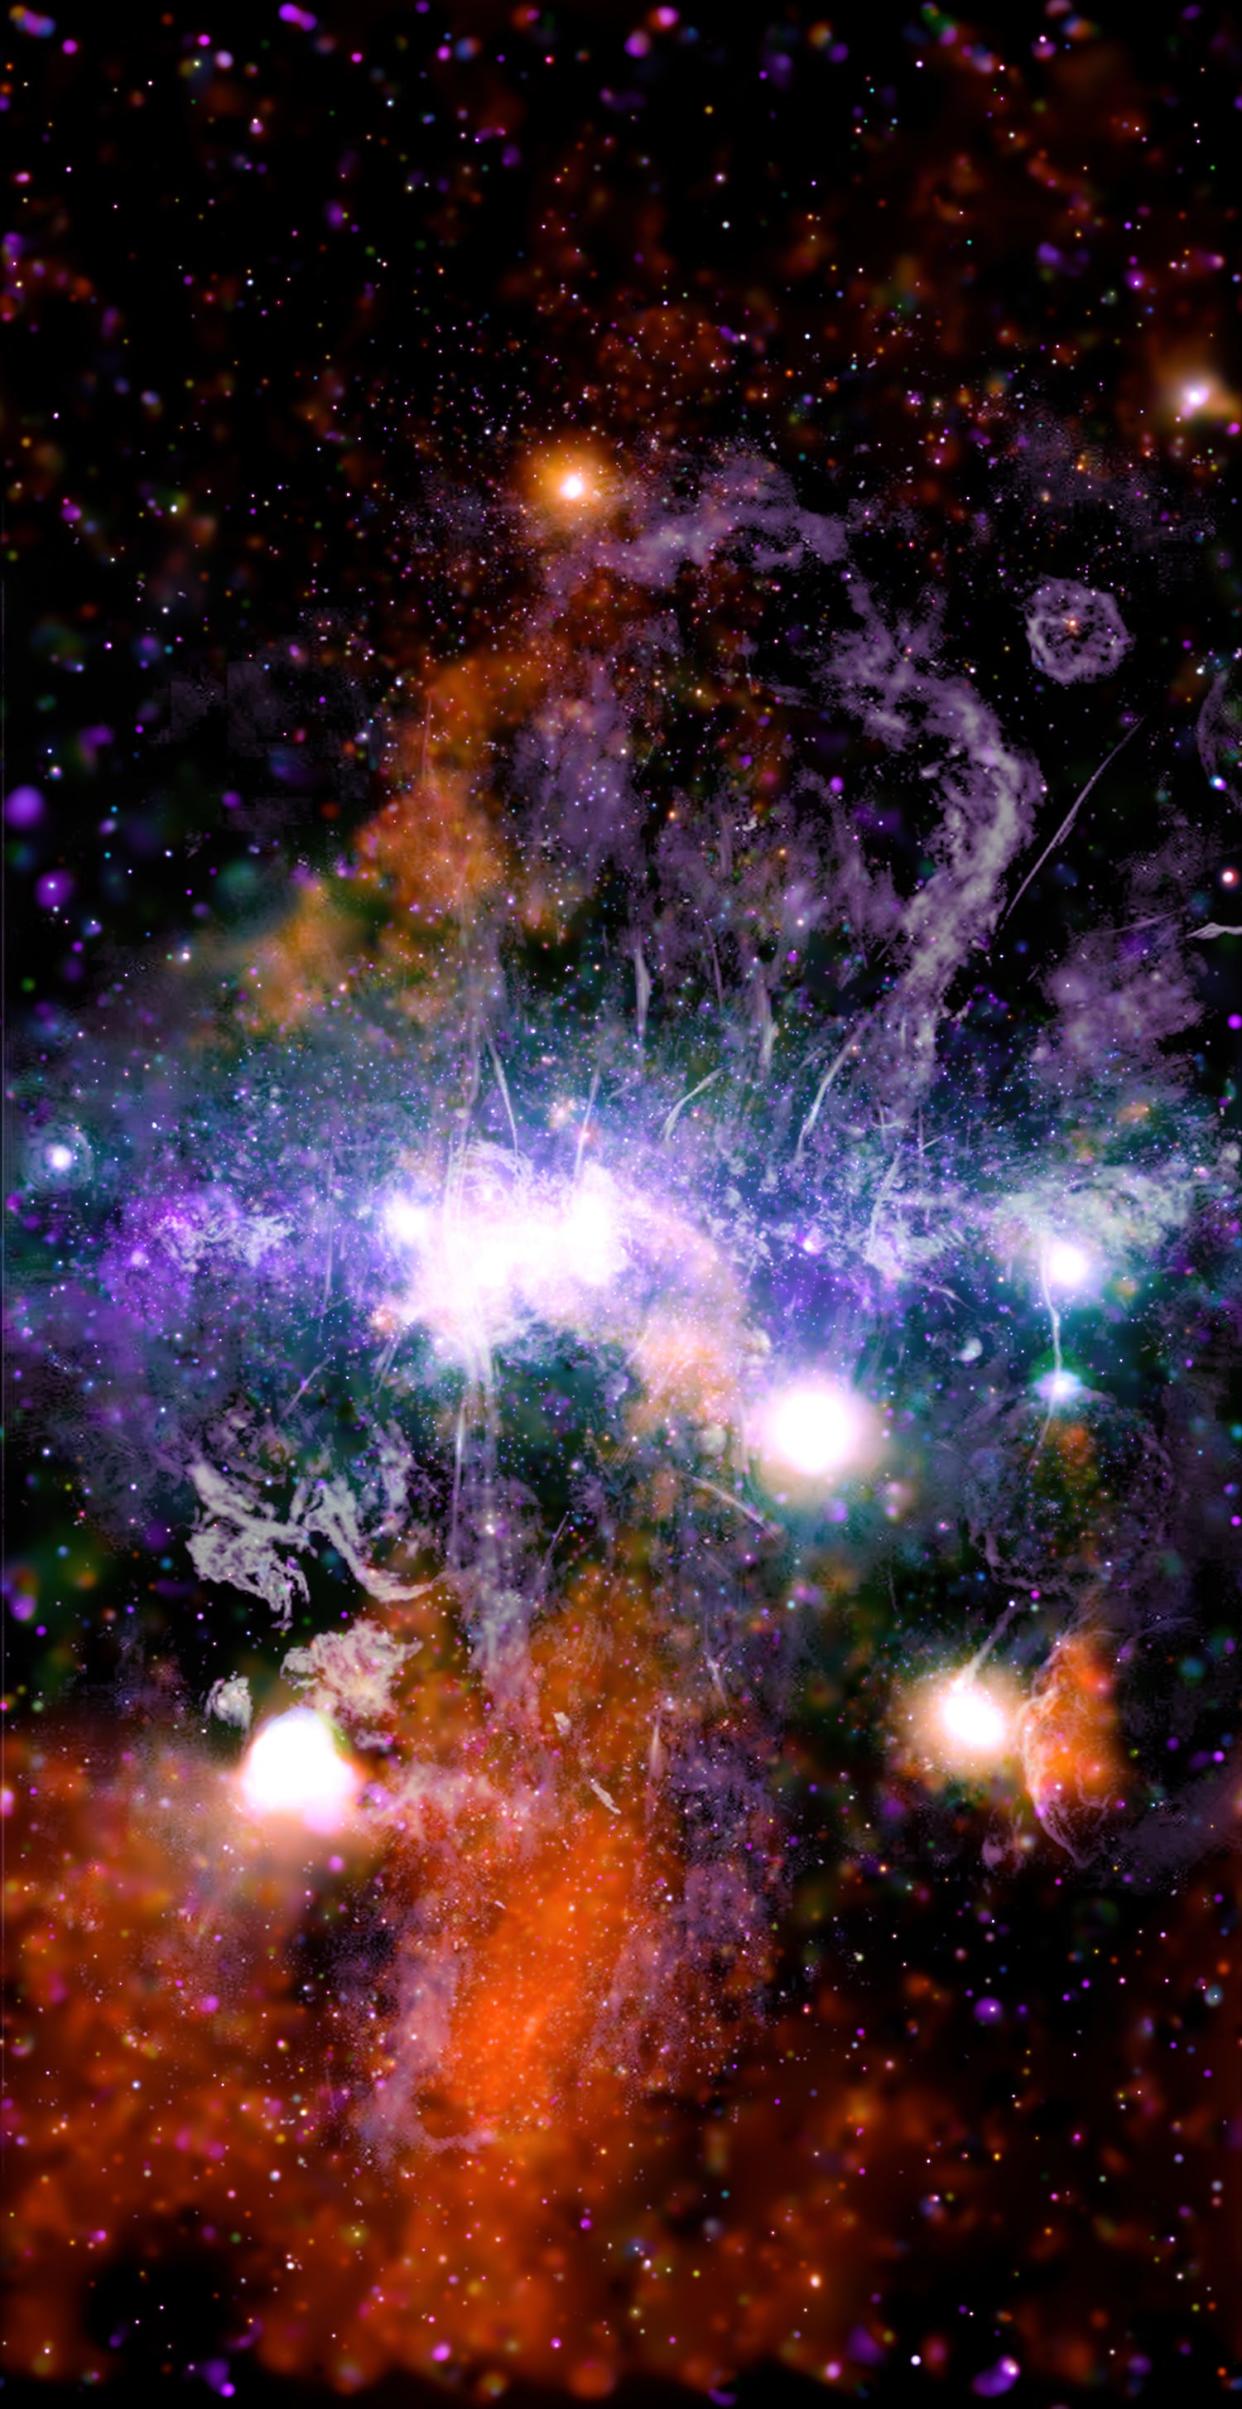 milky way center with glowing purple and orange clouds peppered with bright white lights in black and purple space